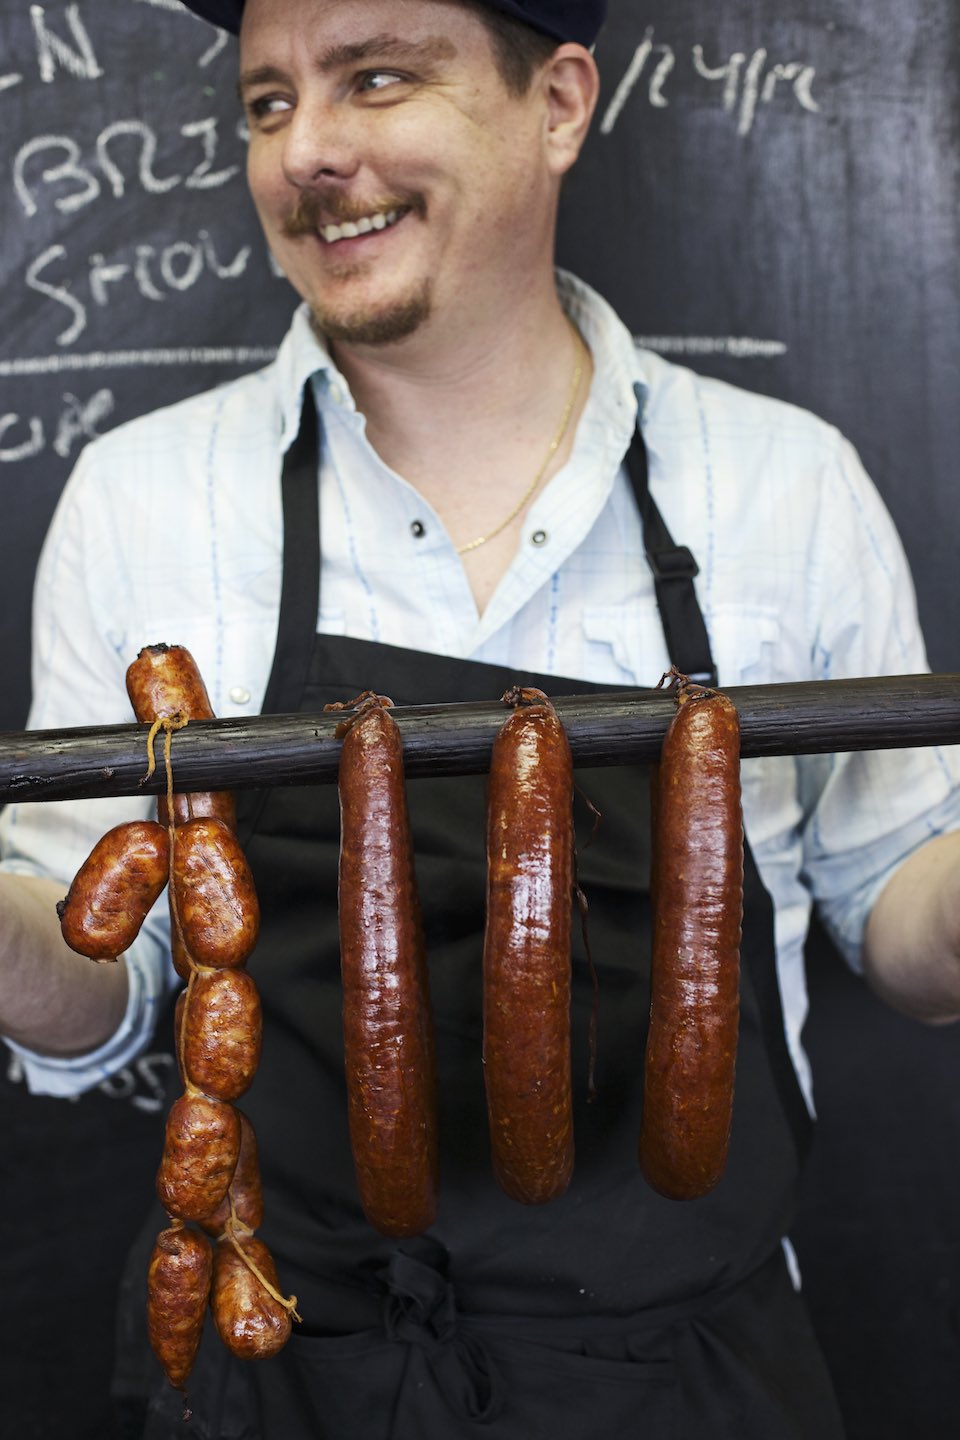 Jody Horton Photography - Chef Tim Byres holding presenting smoked sausages.